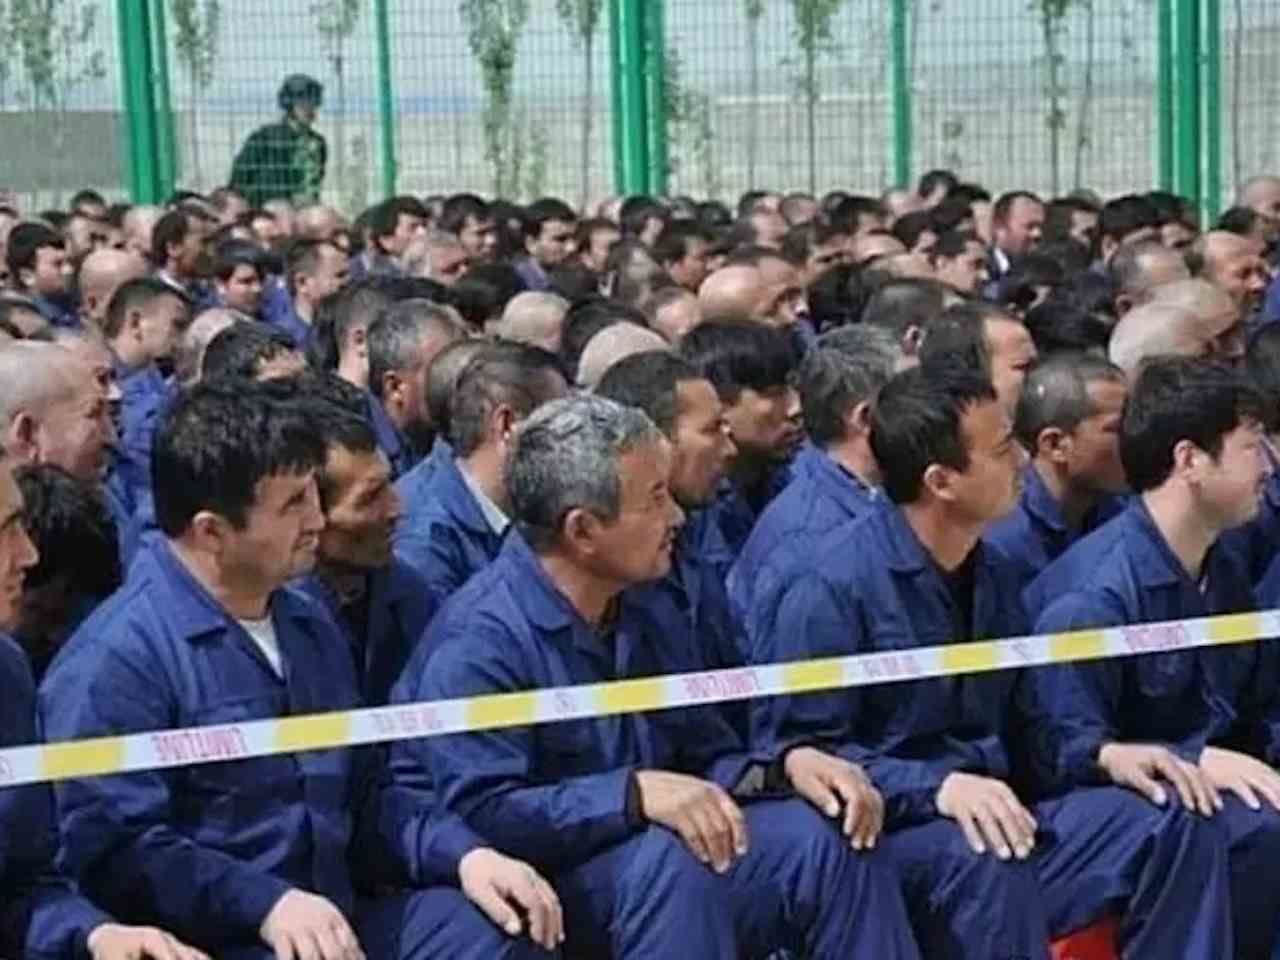 Communist China has unjustly imprisoned least one million and most likely more of Uyghurs and other non-ethnic Muslims in the concentration camps.